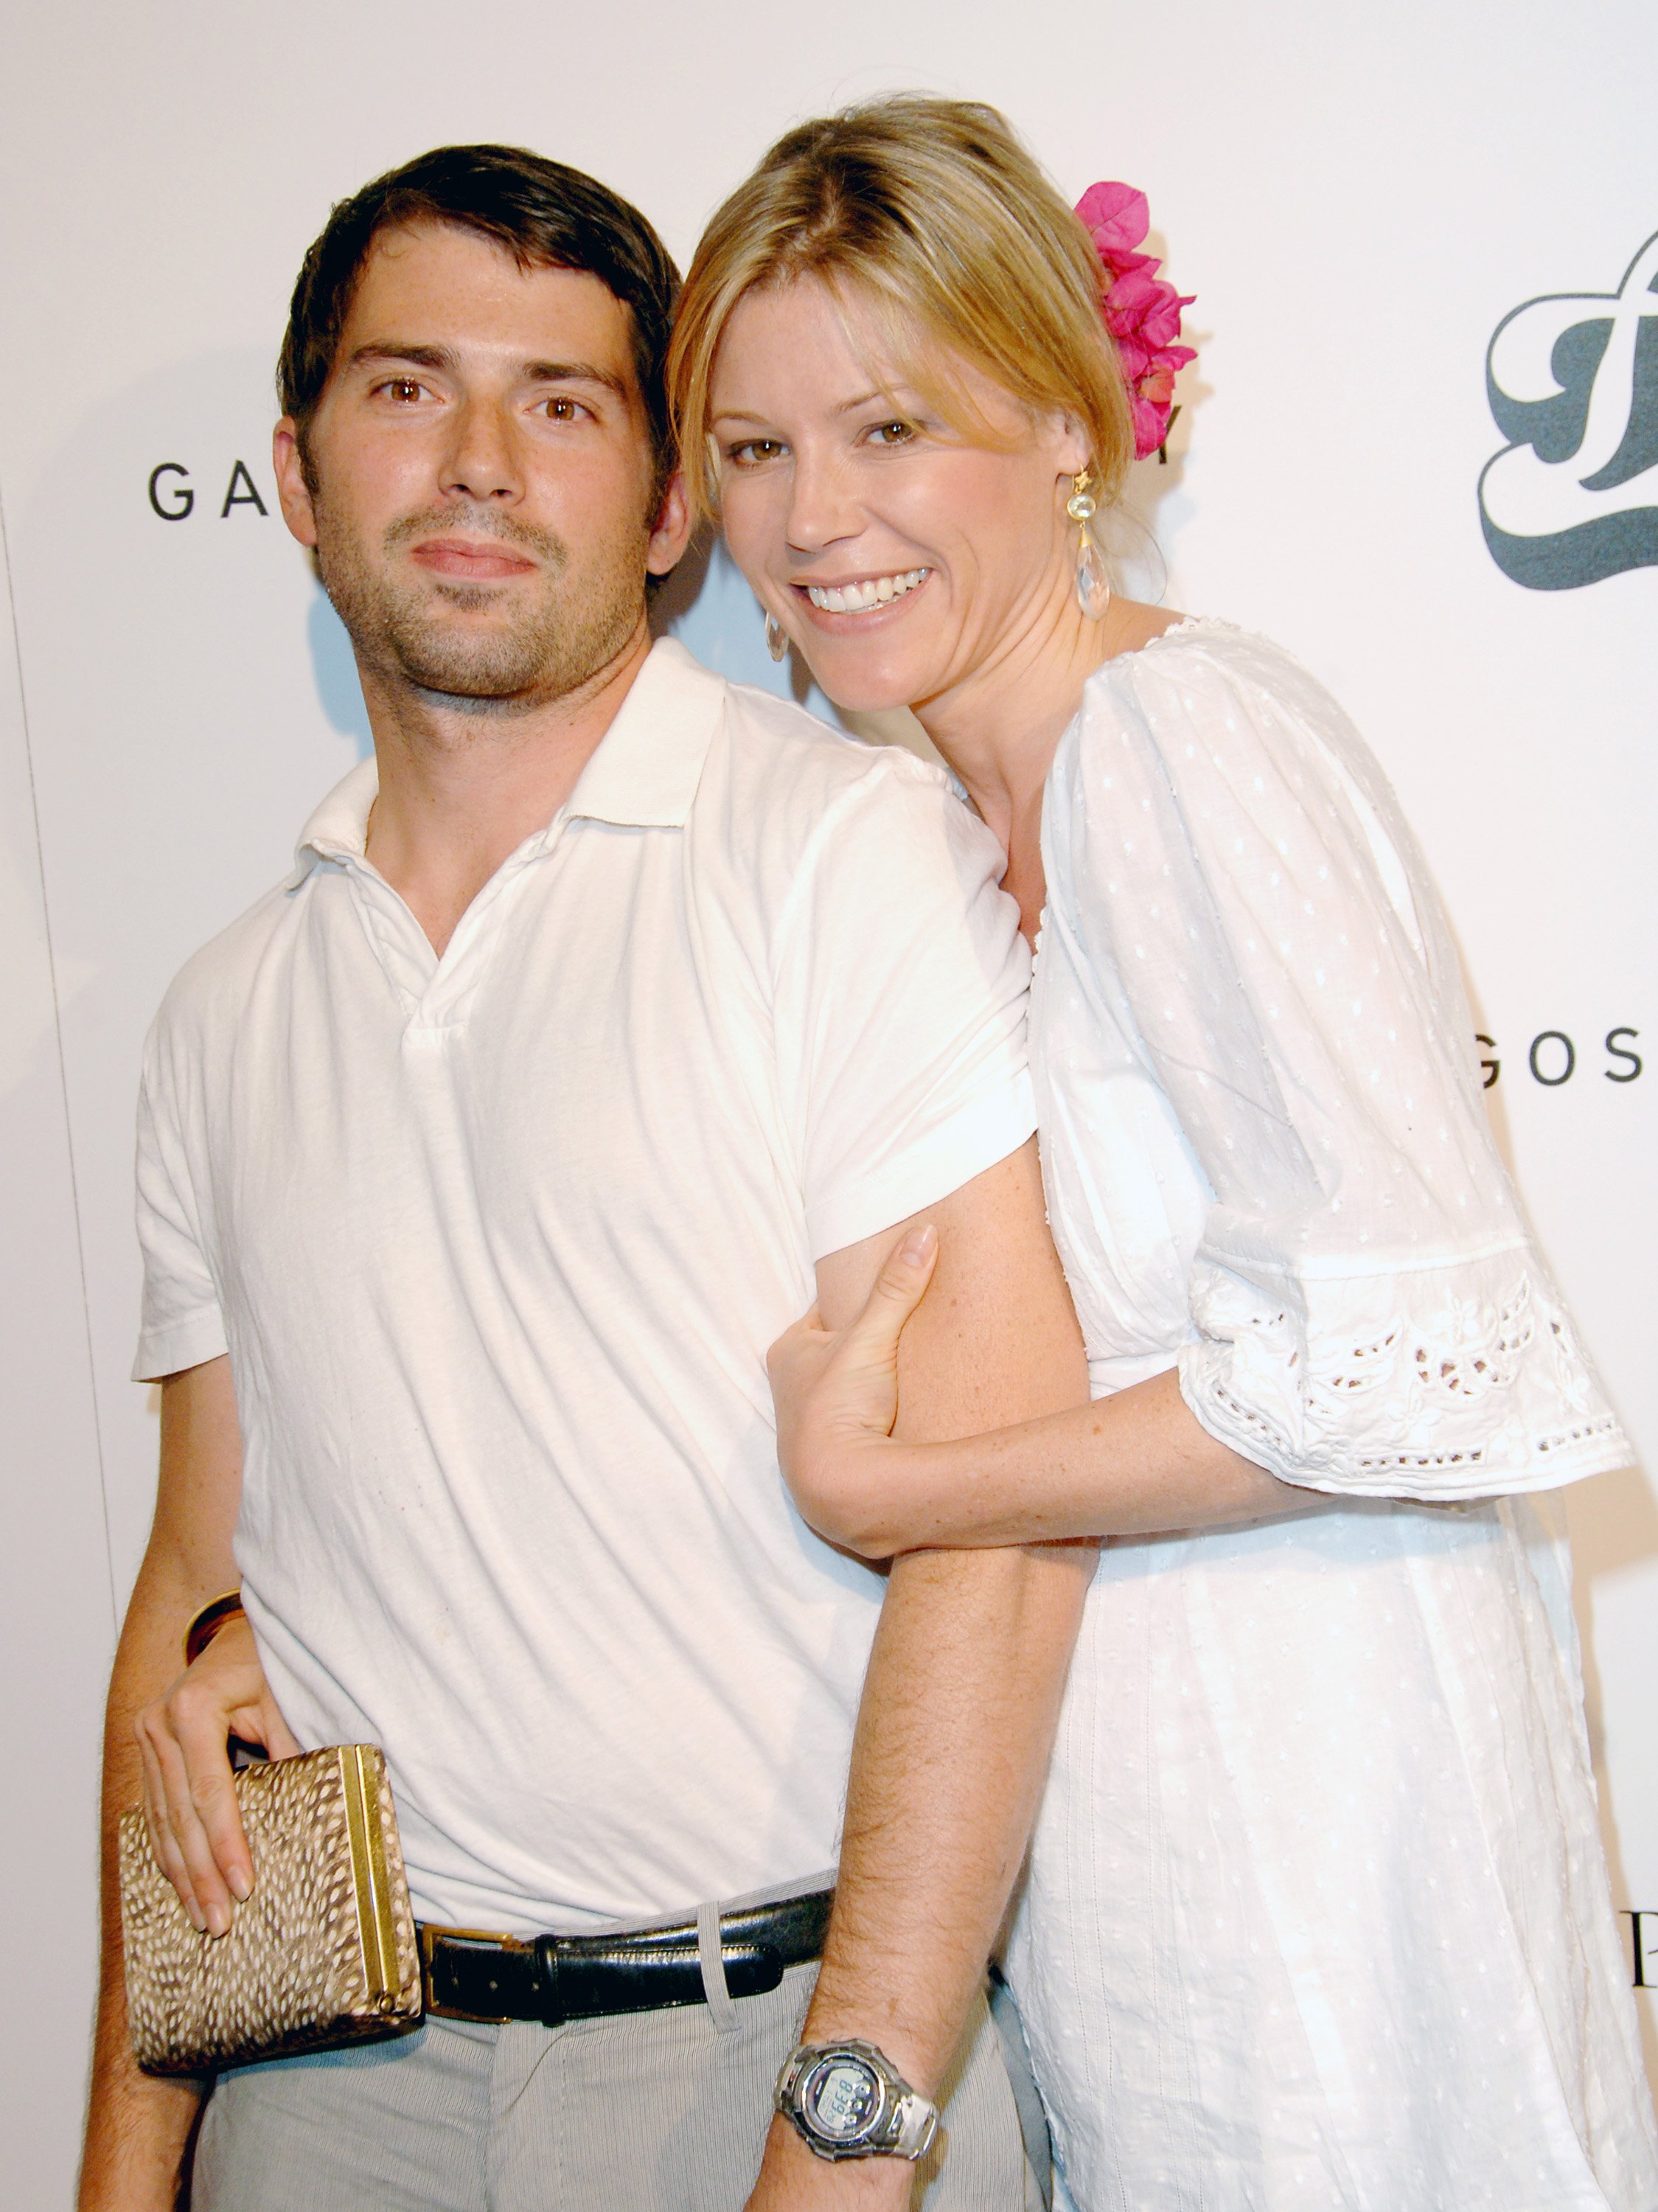 Julie Bowen and husband Scott Phillips during Hollywood and Fashion Unite for The Inaugural "Kid Art Event: A Benefit for P.S. Arts" - June 1, 2006 | Photo: Getty Images